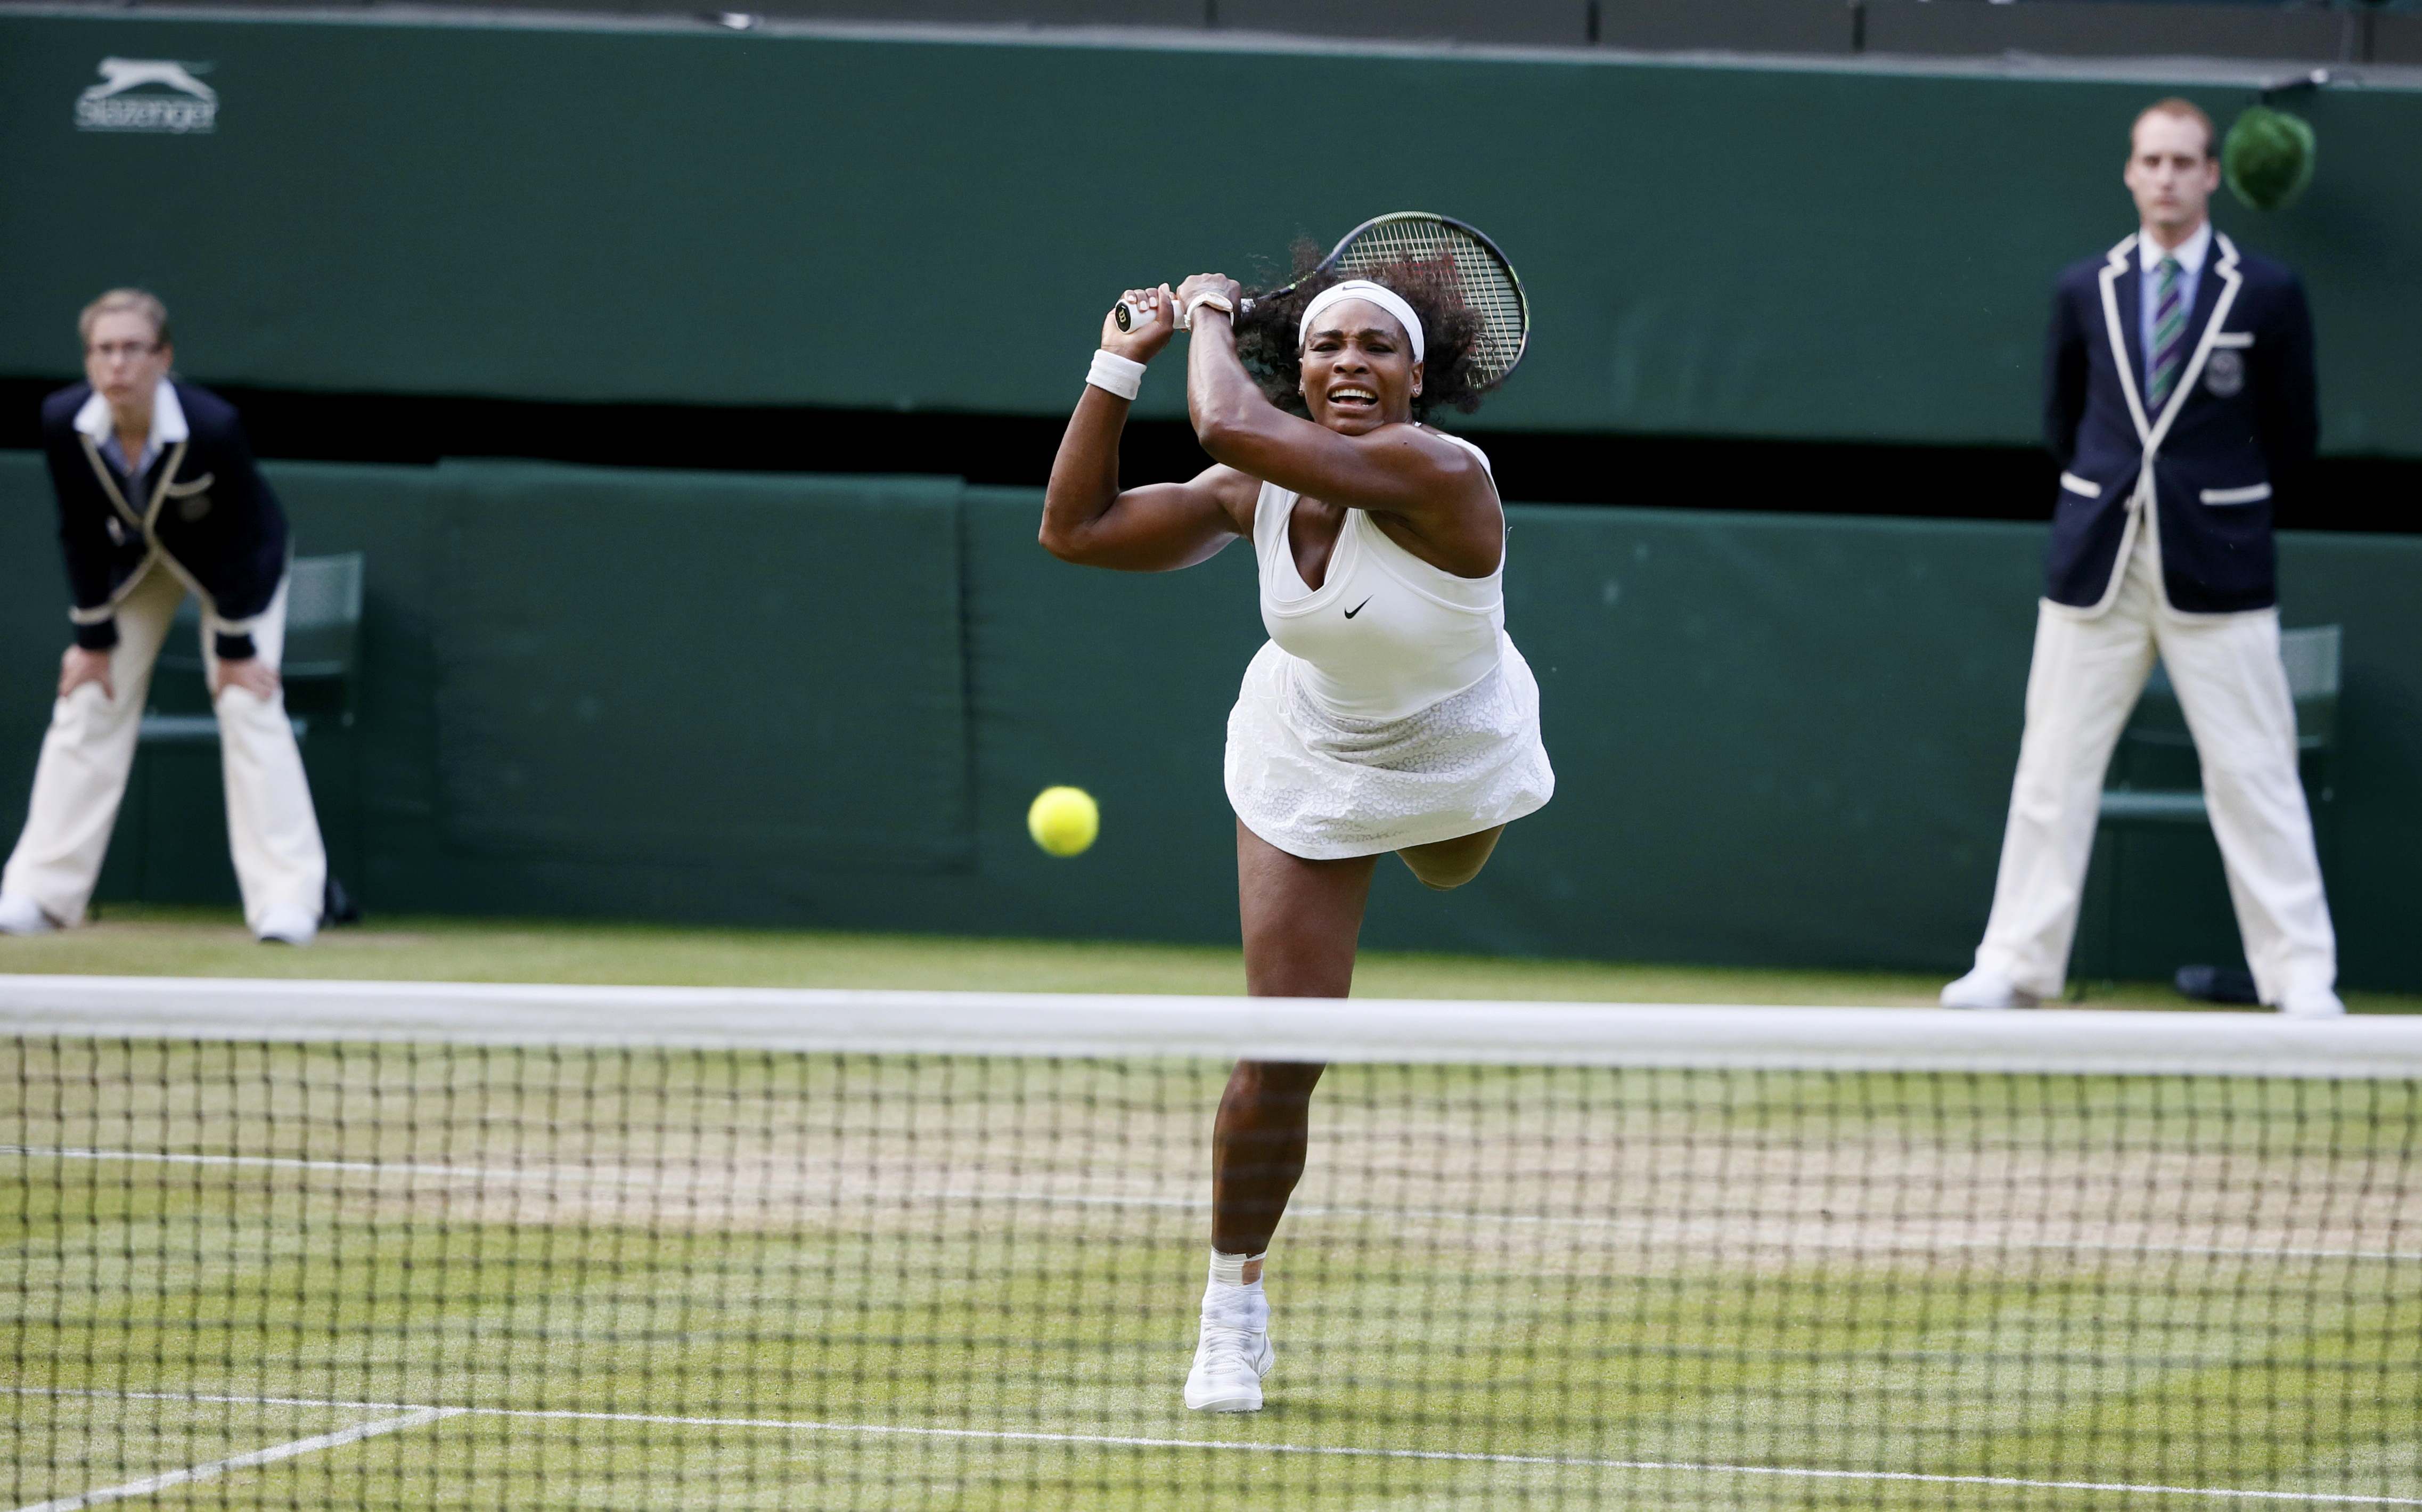 Serena Williams of the U.S.A. hits the ball during her match against Heather Watson of Britain at the Wimbledon Tennis Championships in London, July 3, 2015. REUTERS/Stefan Wermuth